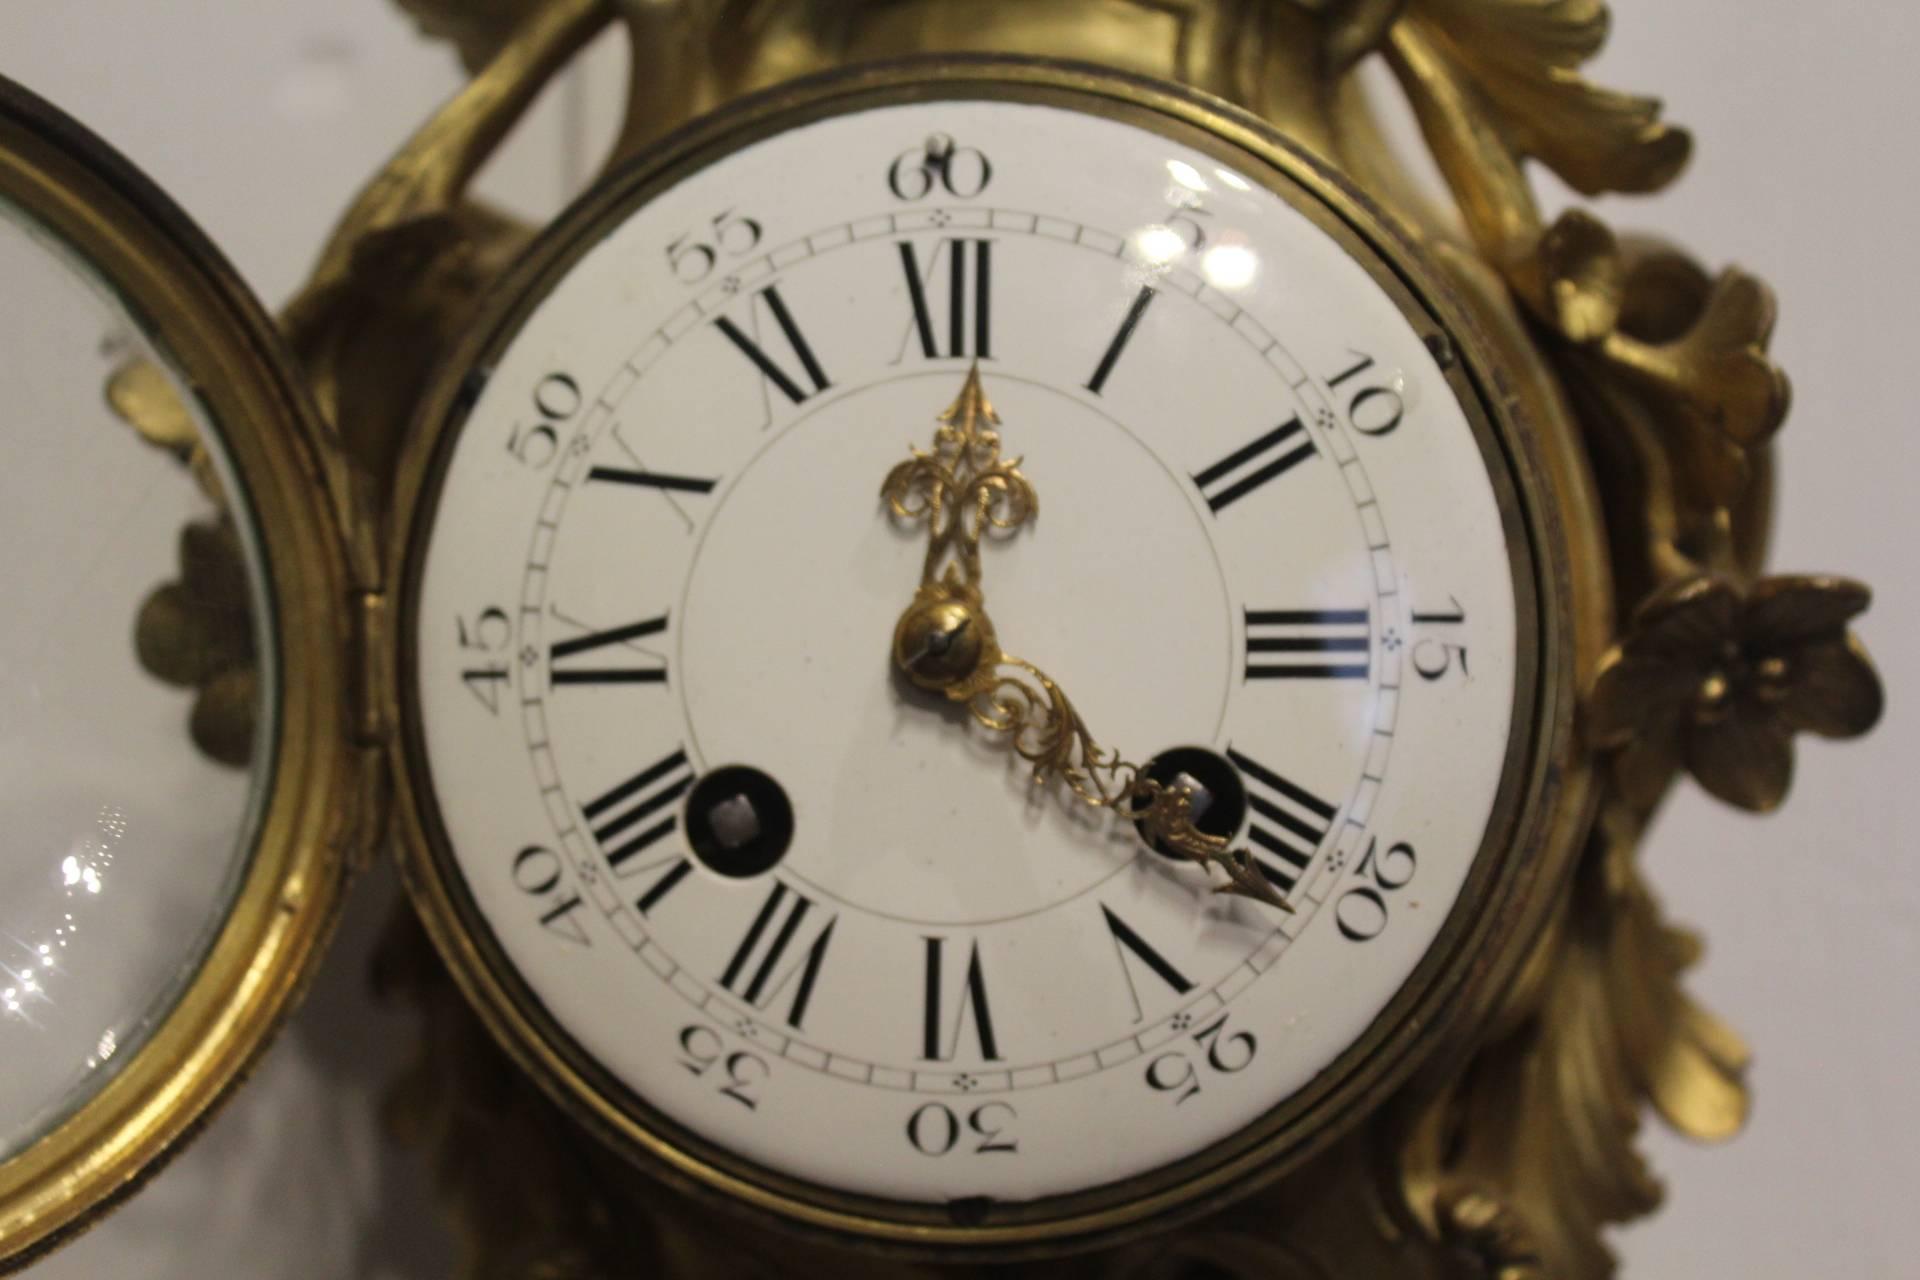 19th century, French Ormolu cartel clock, circa 1890.

This is a traditional pattern of case much beloved by French makers drawing on the 18th century designs which employ rococo swags and C scrolls and floral embellishments.

This fine movement of